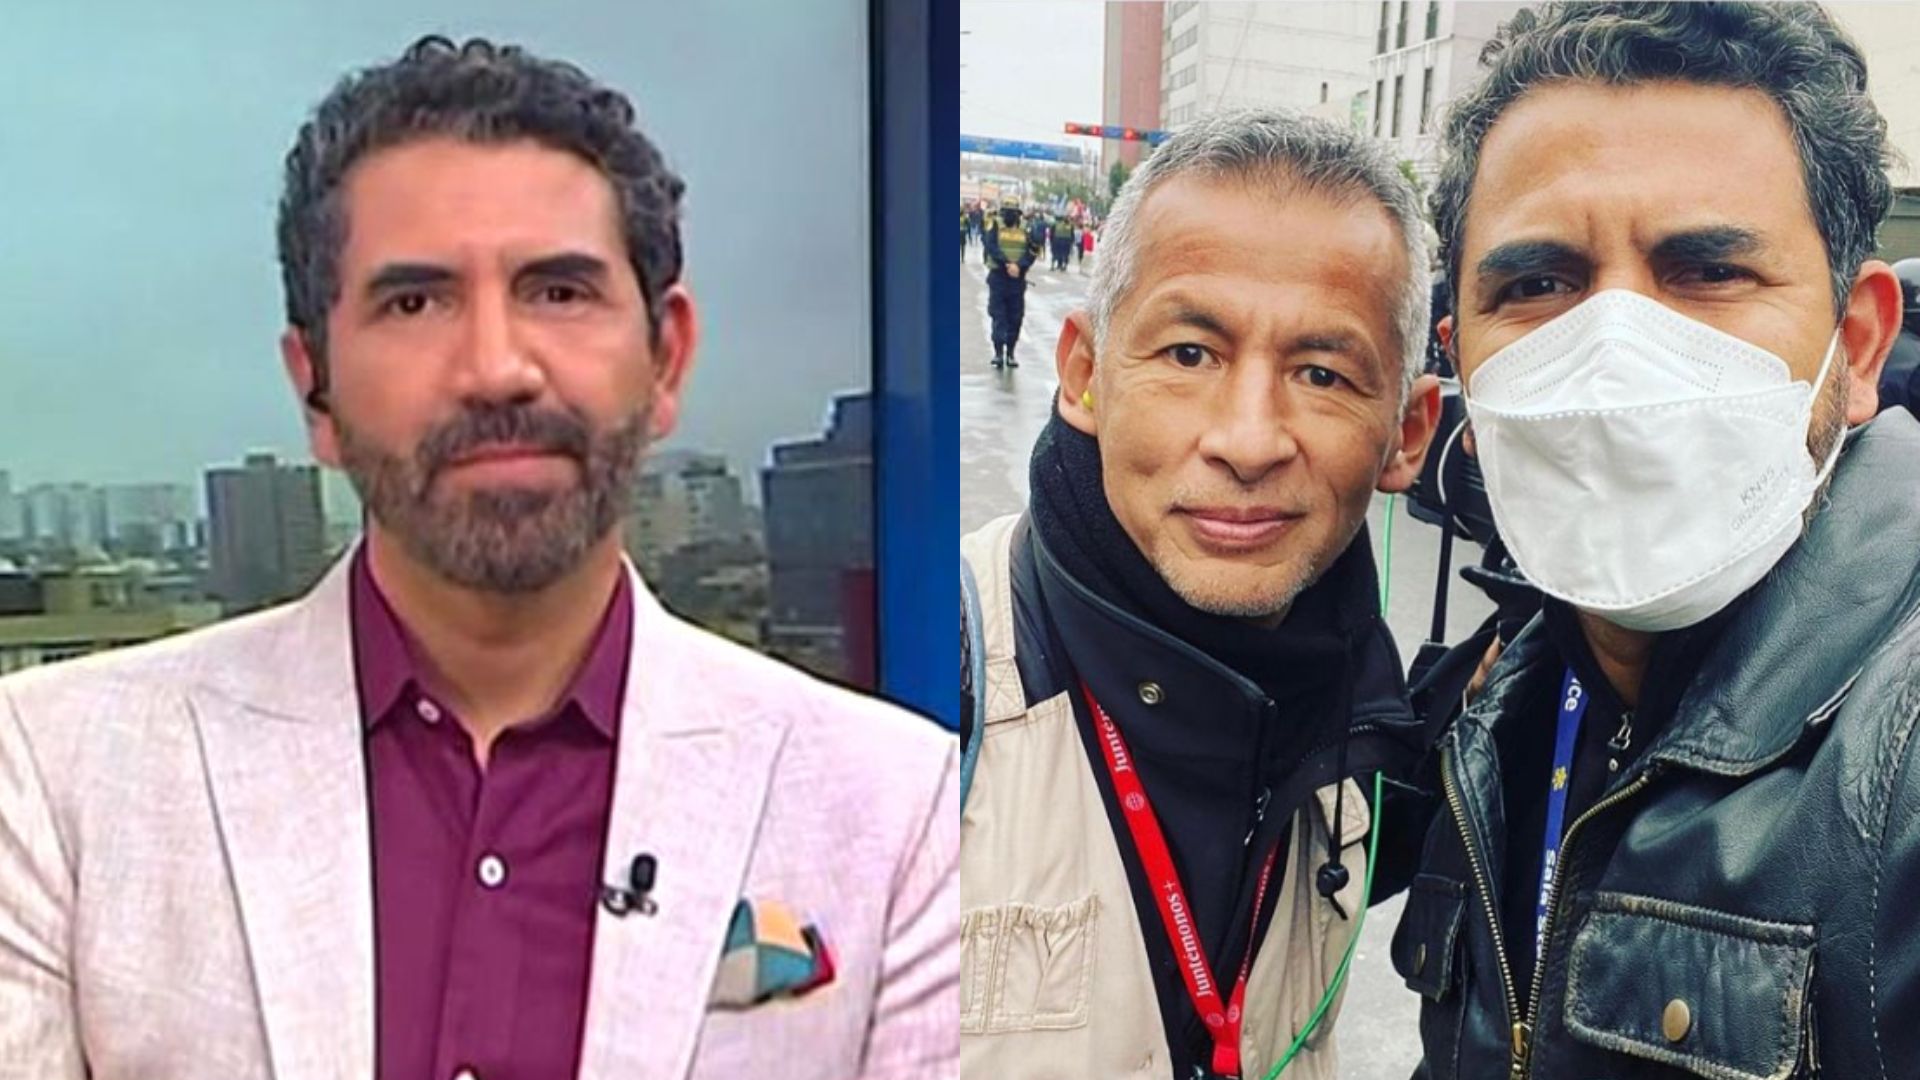 Fernando Díaz spoke in networks after attacks on the press in the 'Take of Lima'.